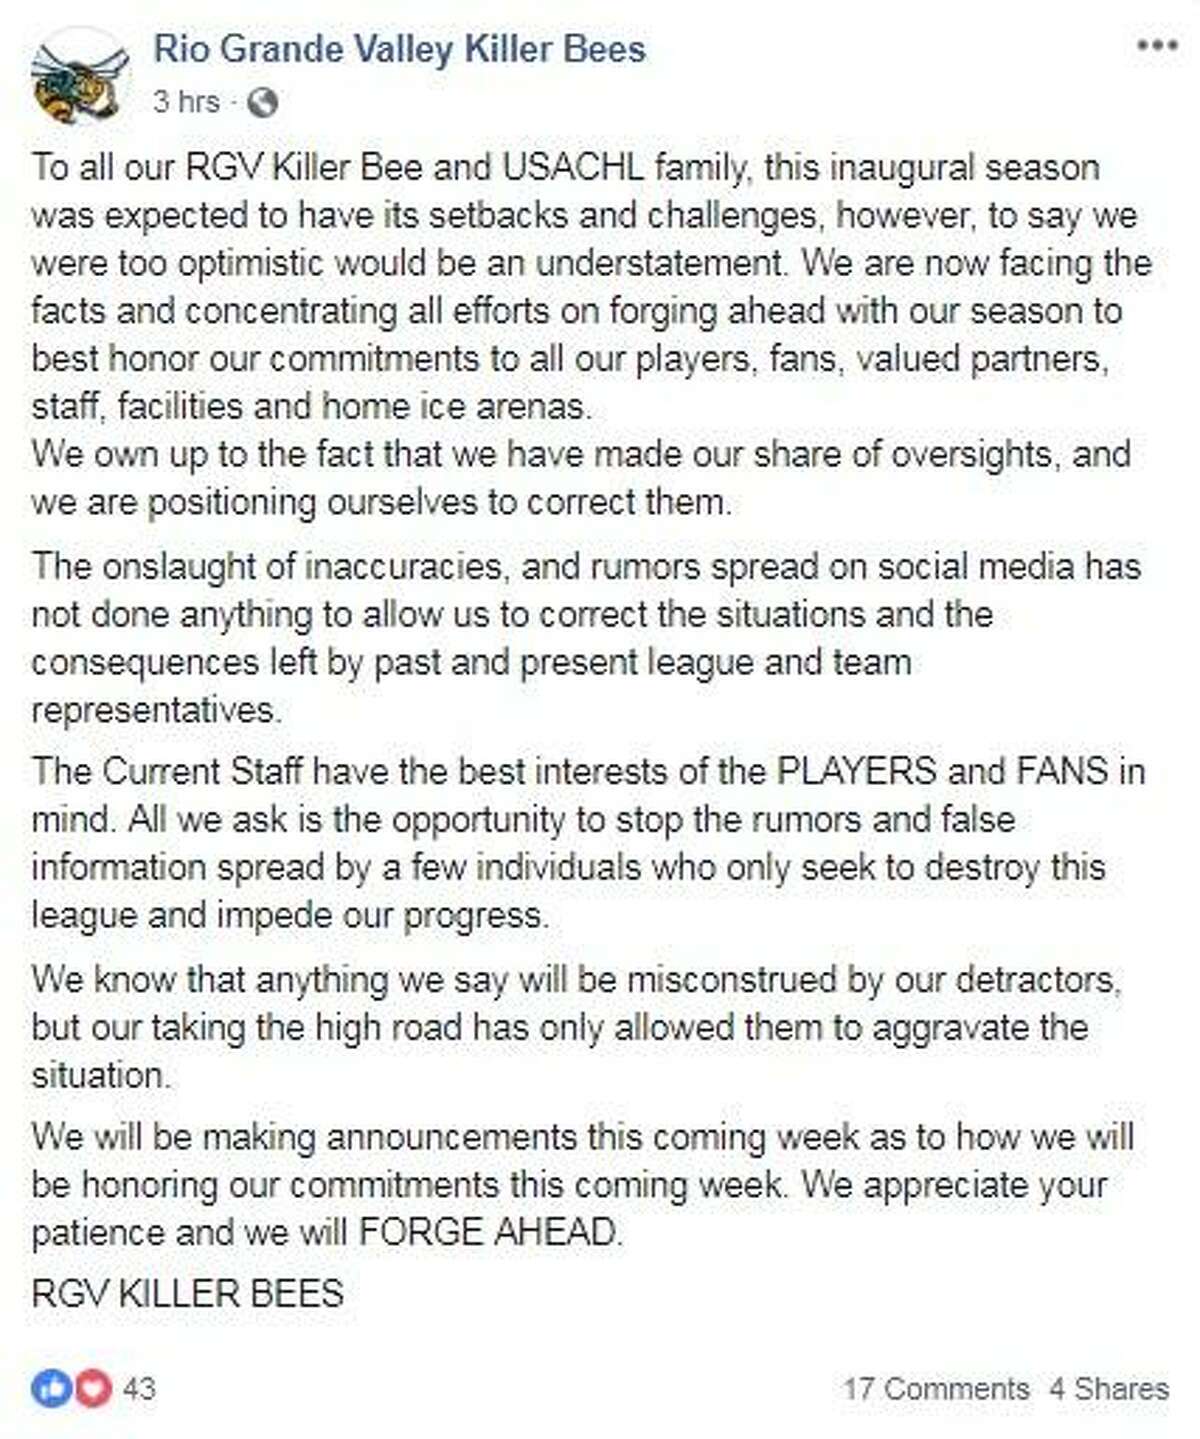 The Rio Grande Valley Killer Bees addressed its fans on Facebook after the weekend road games were postponed on Saturday.